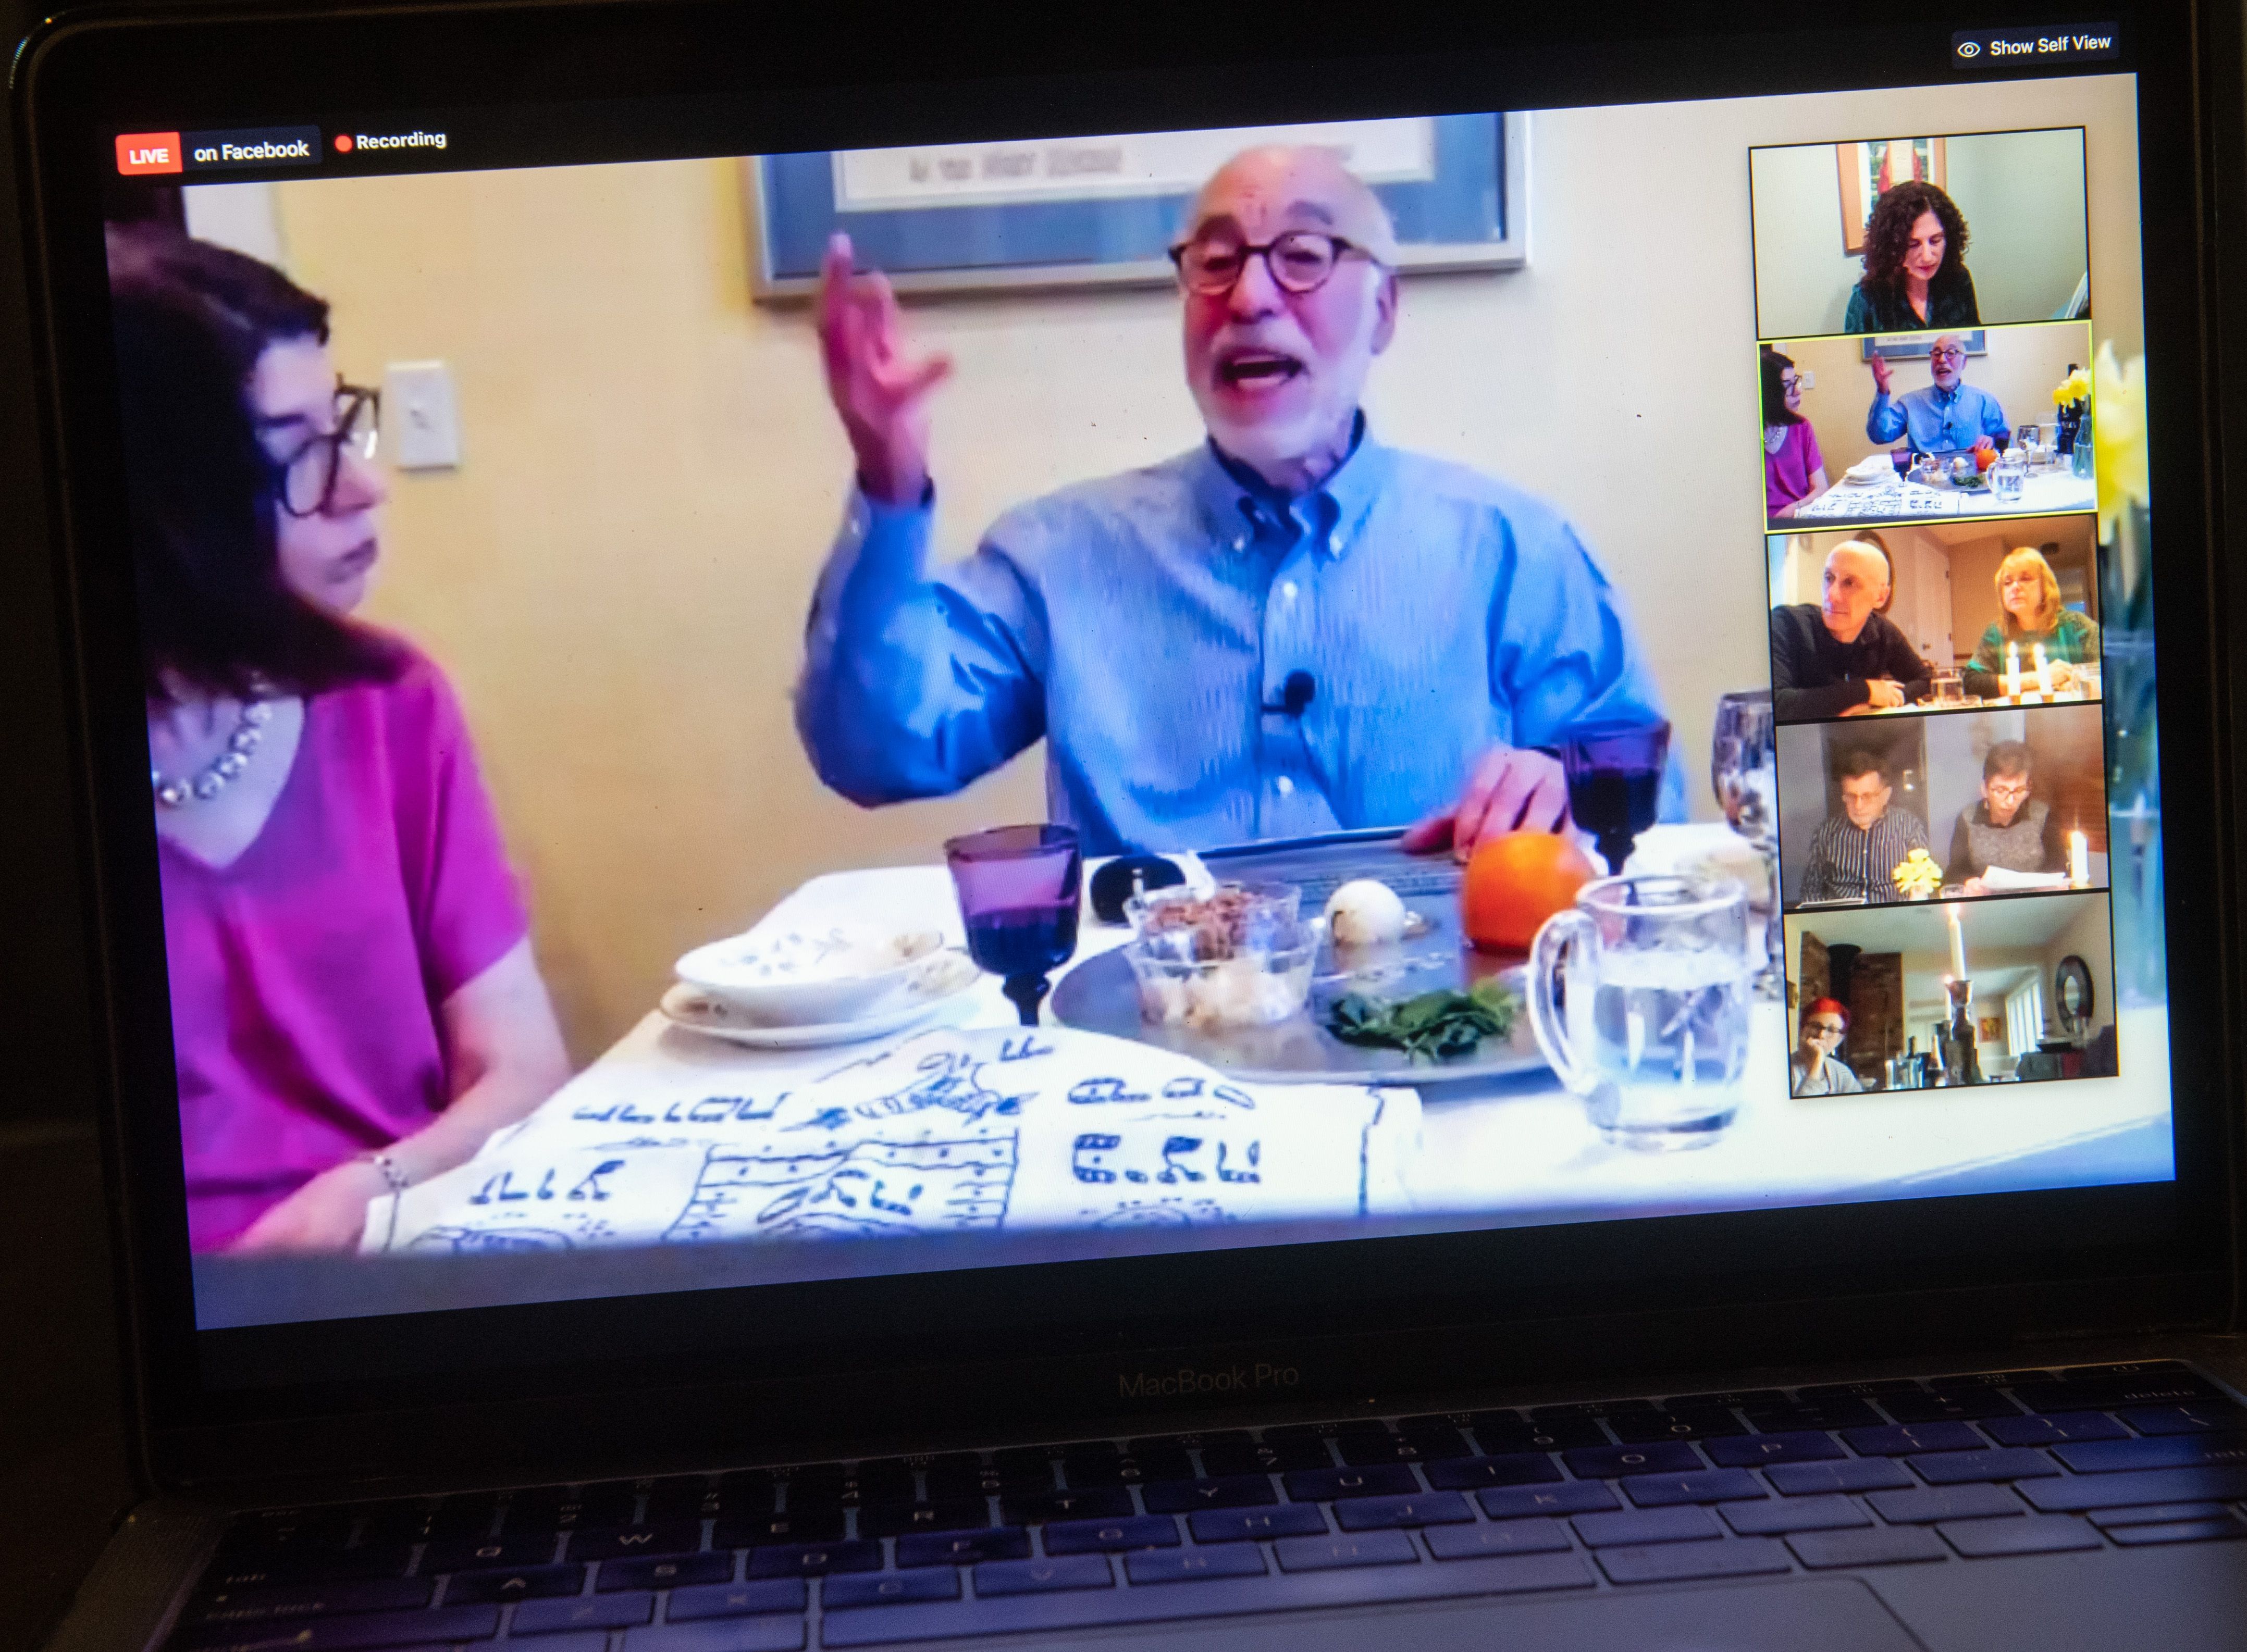 This image shows a man on a laptop screen during Seder